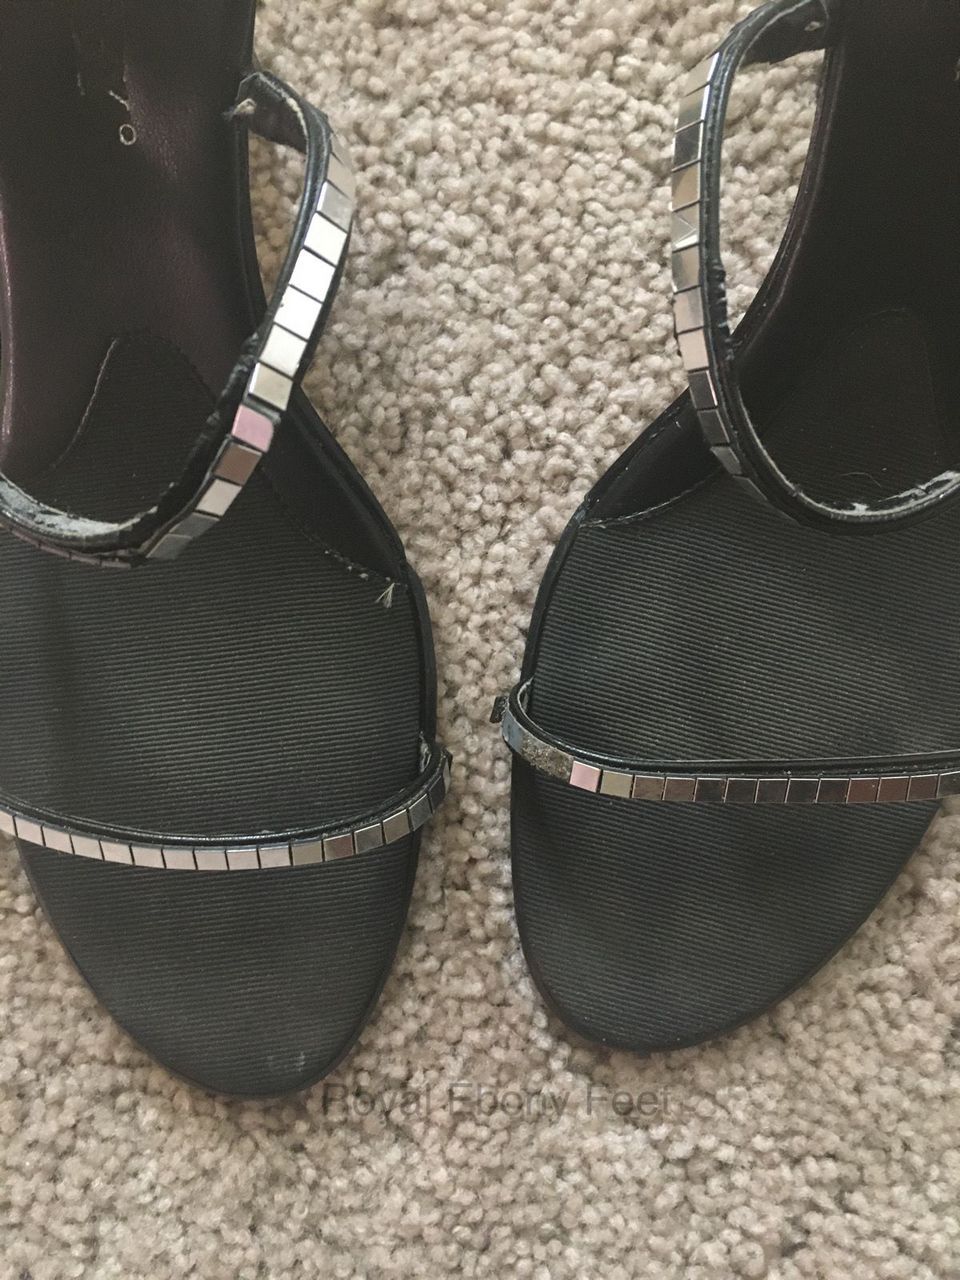 Majesty Exotic Scent Black Girl Worn Shoes Smelling